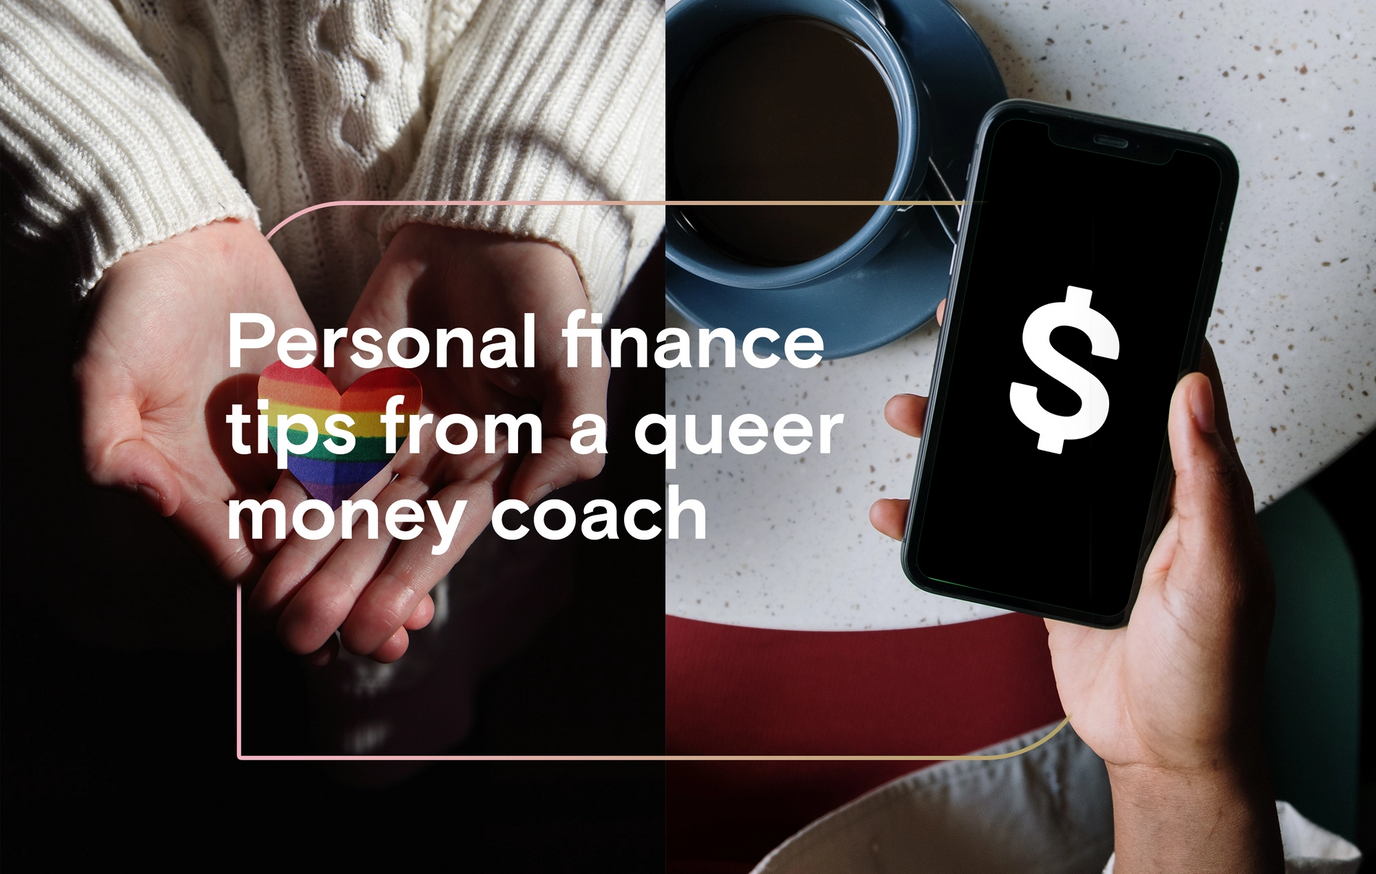 Personal finance tips from a queer money coach